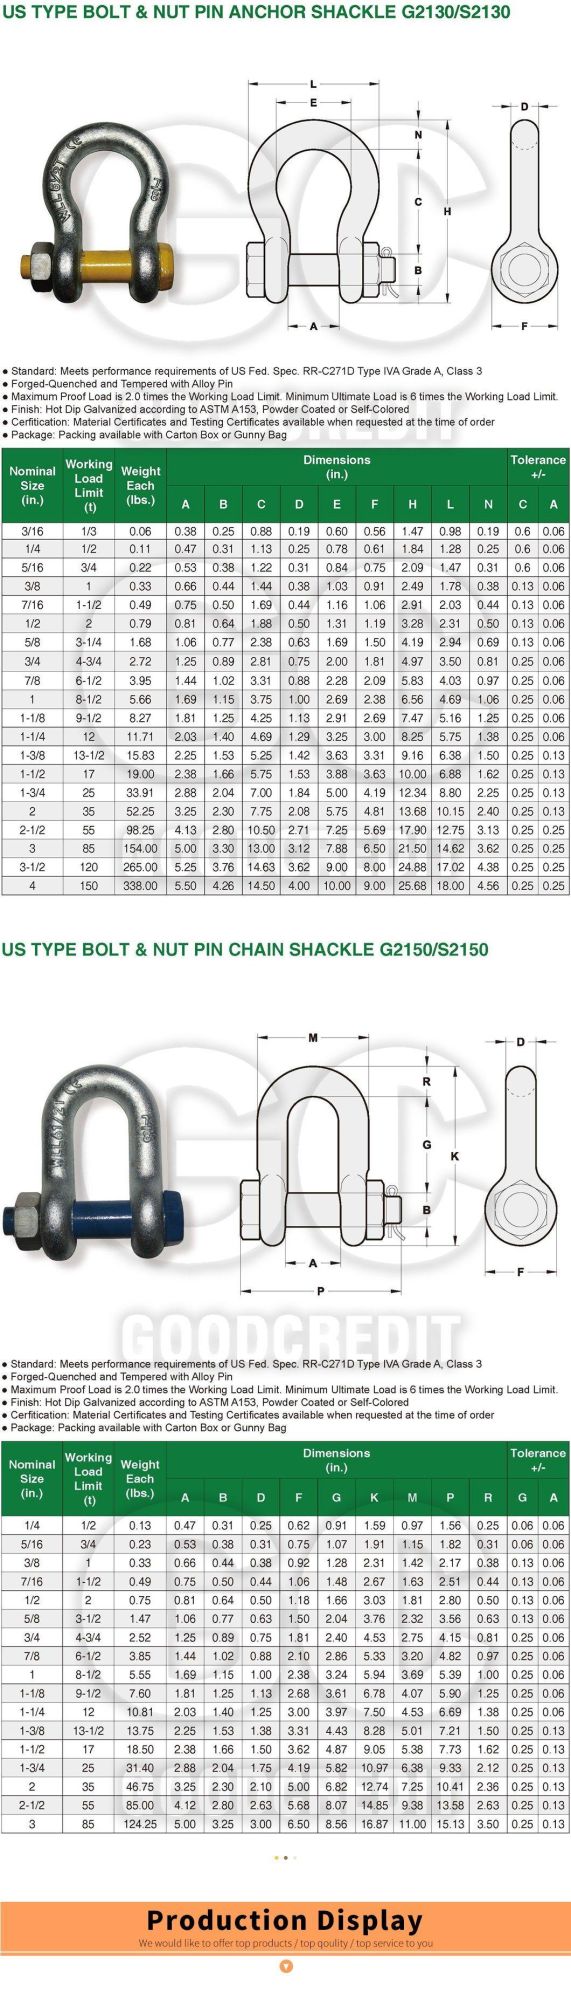 D Shackle Us Type G210 Shackle Stainless Steel Material